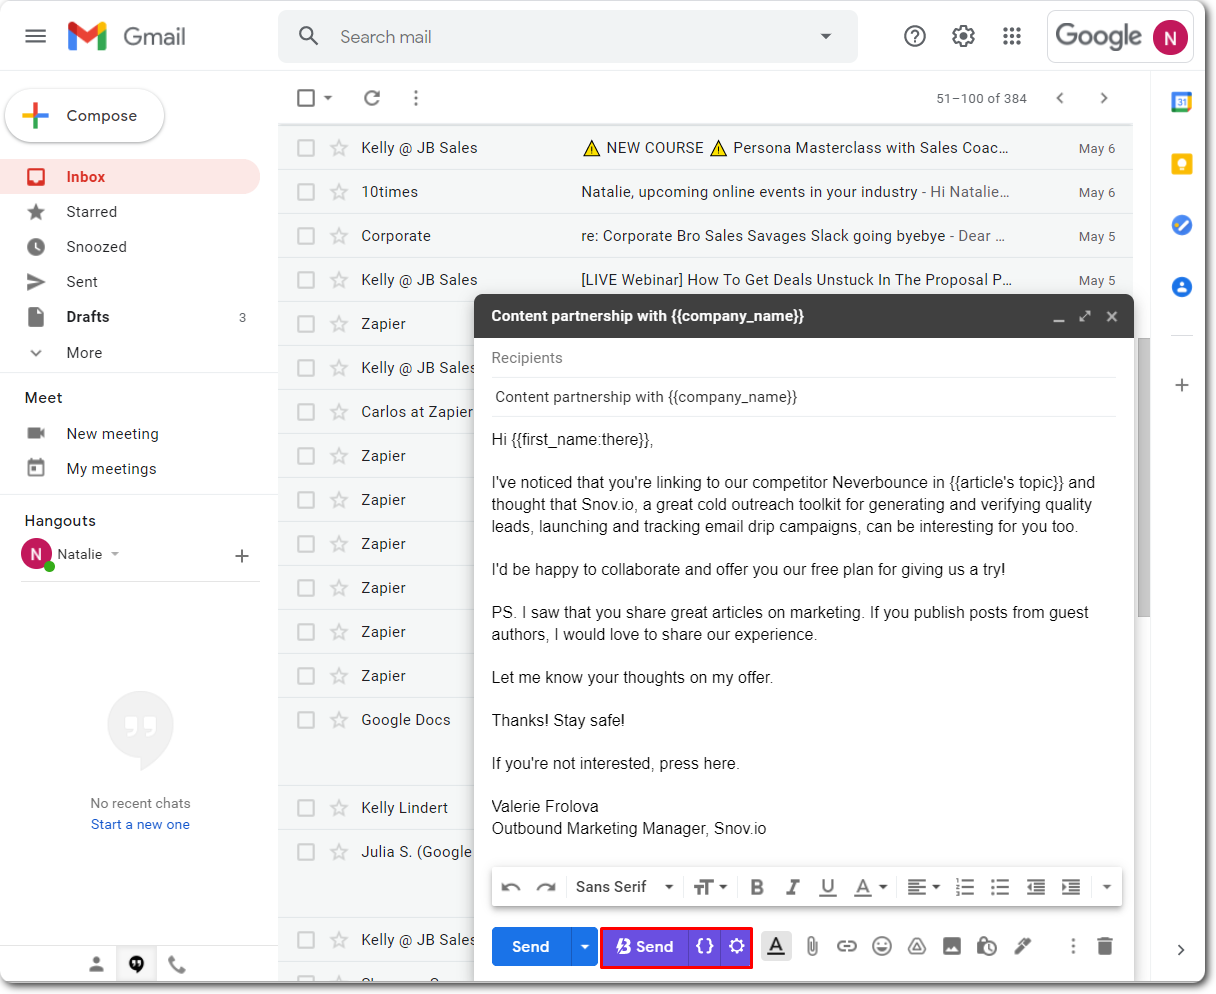 Sending emails with GBlast